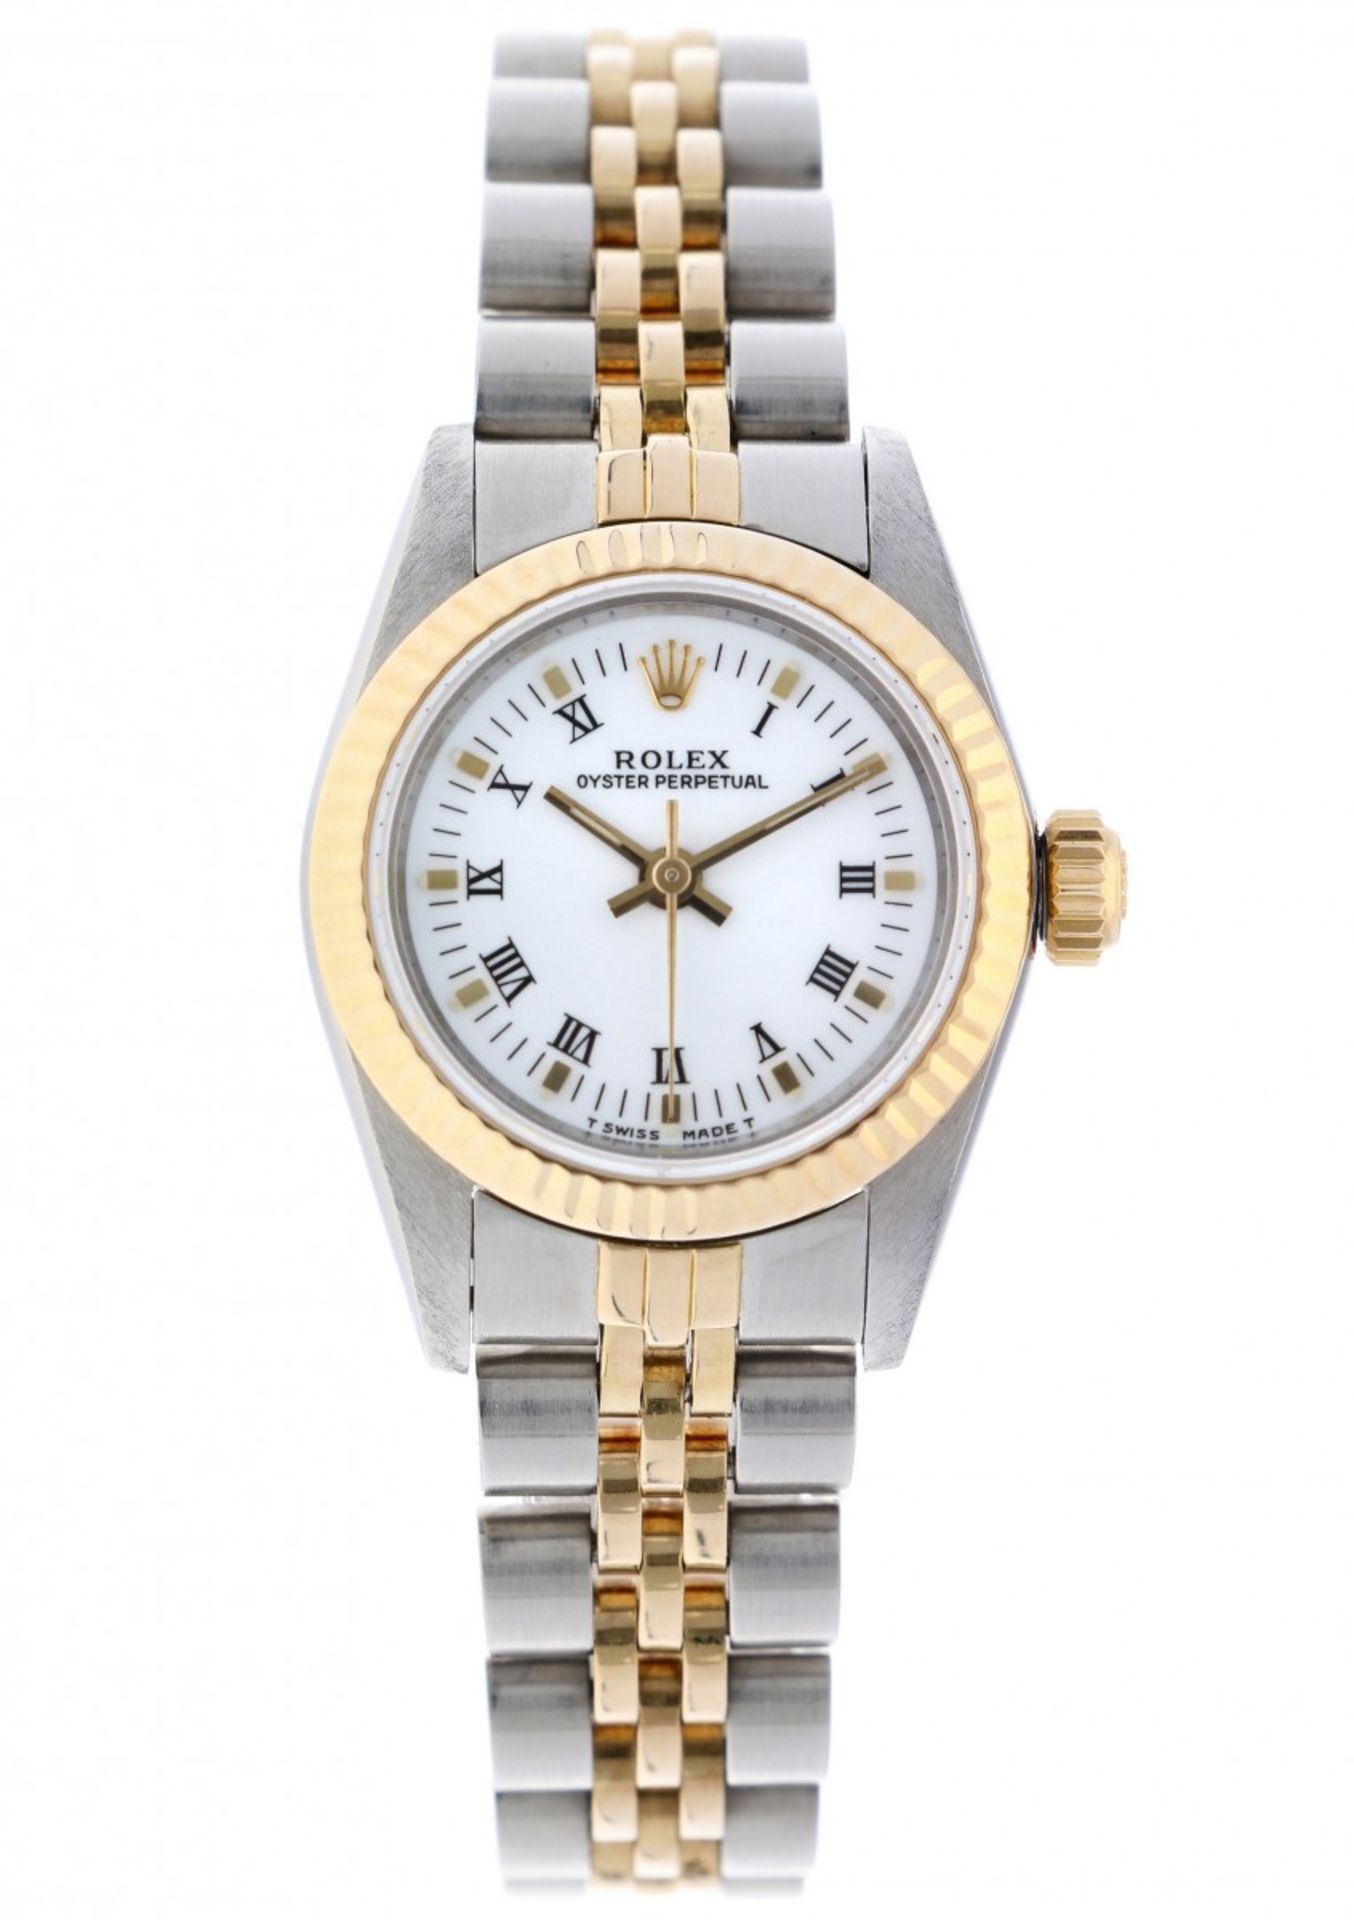 Rolex Oyster Perpetual 67193 - Ladies watch - ca. 1987